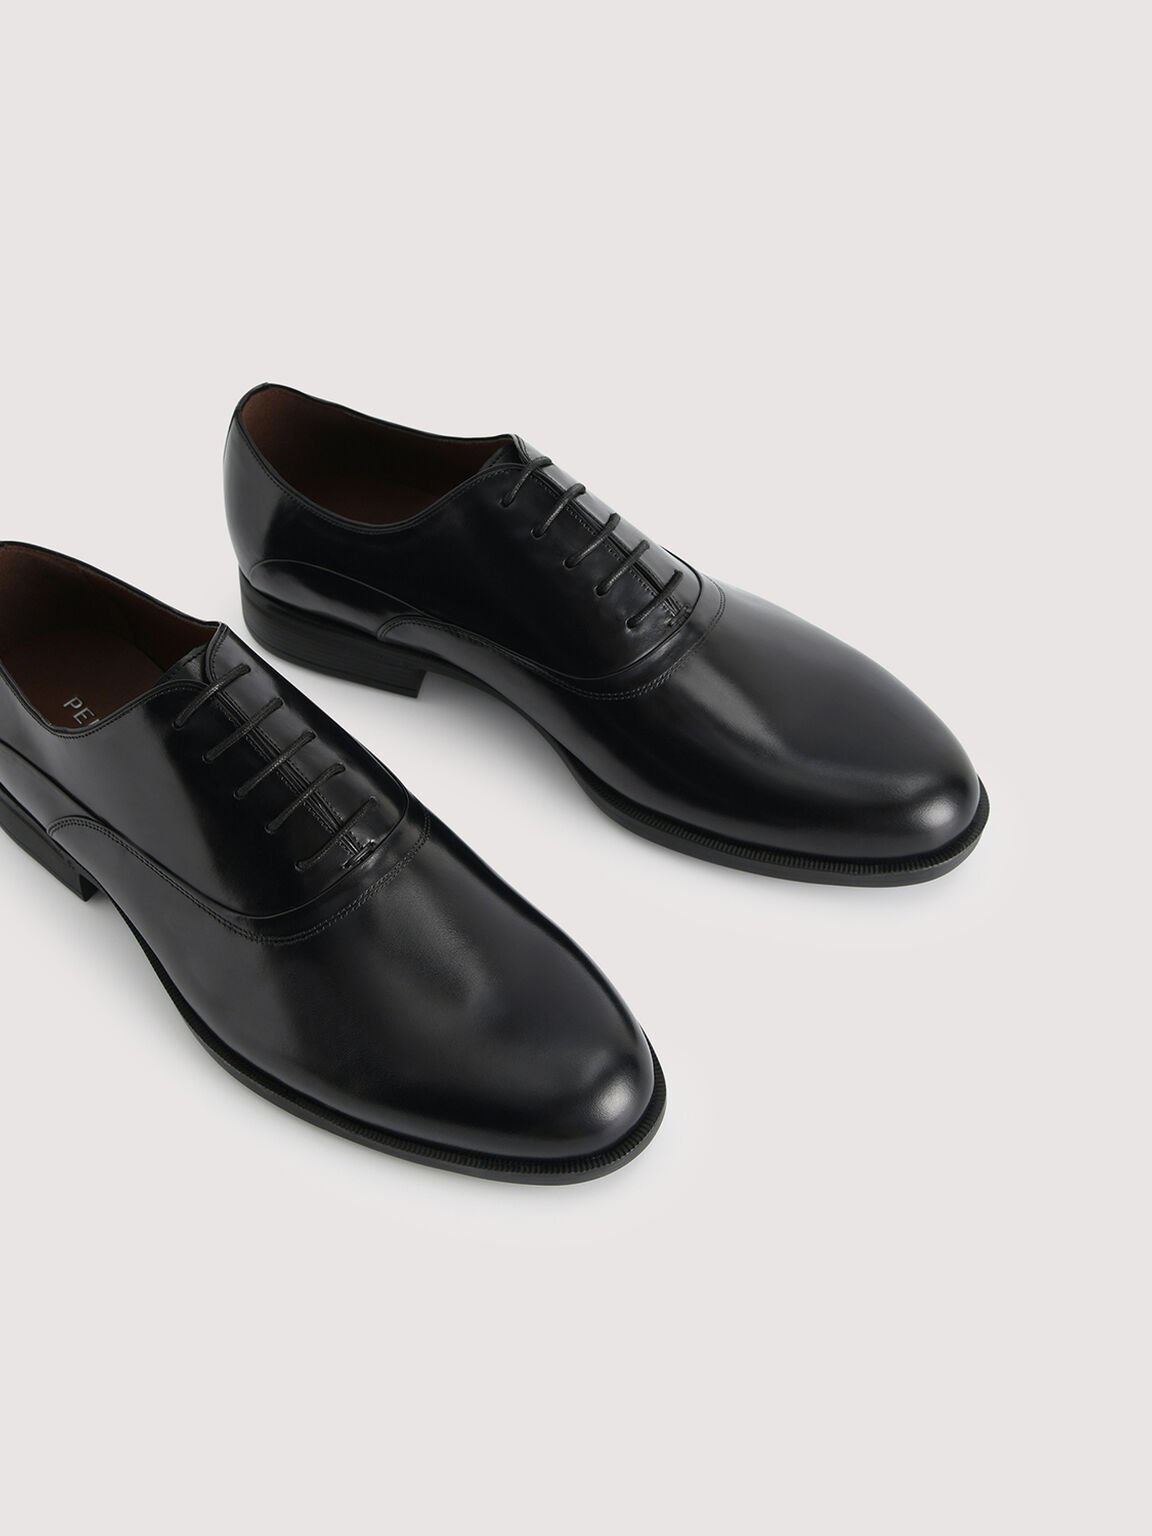 Lightweight Leather Oxford Shoes, Black